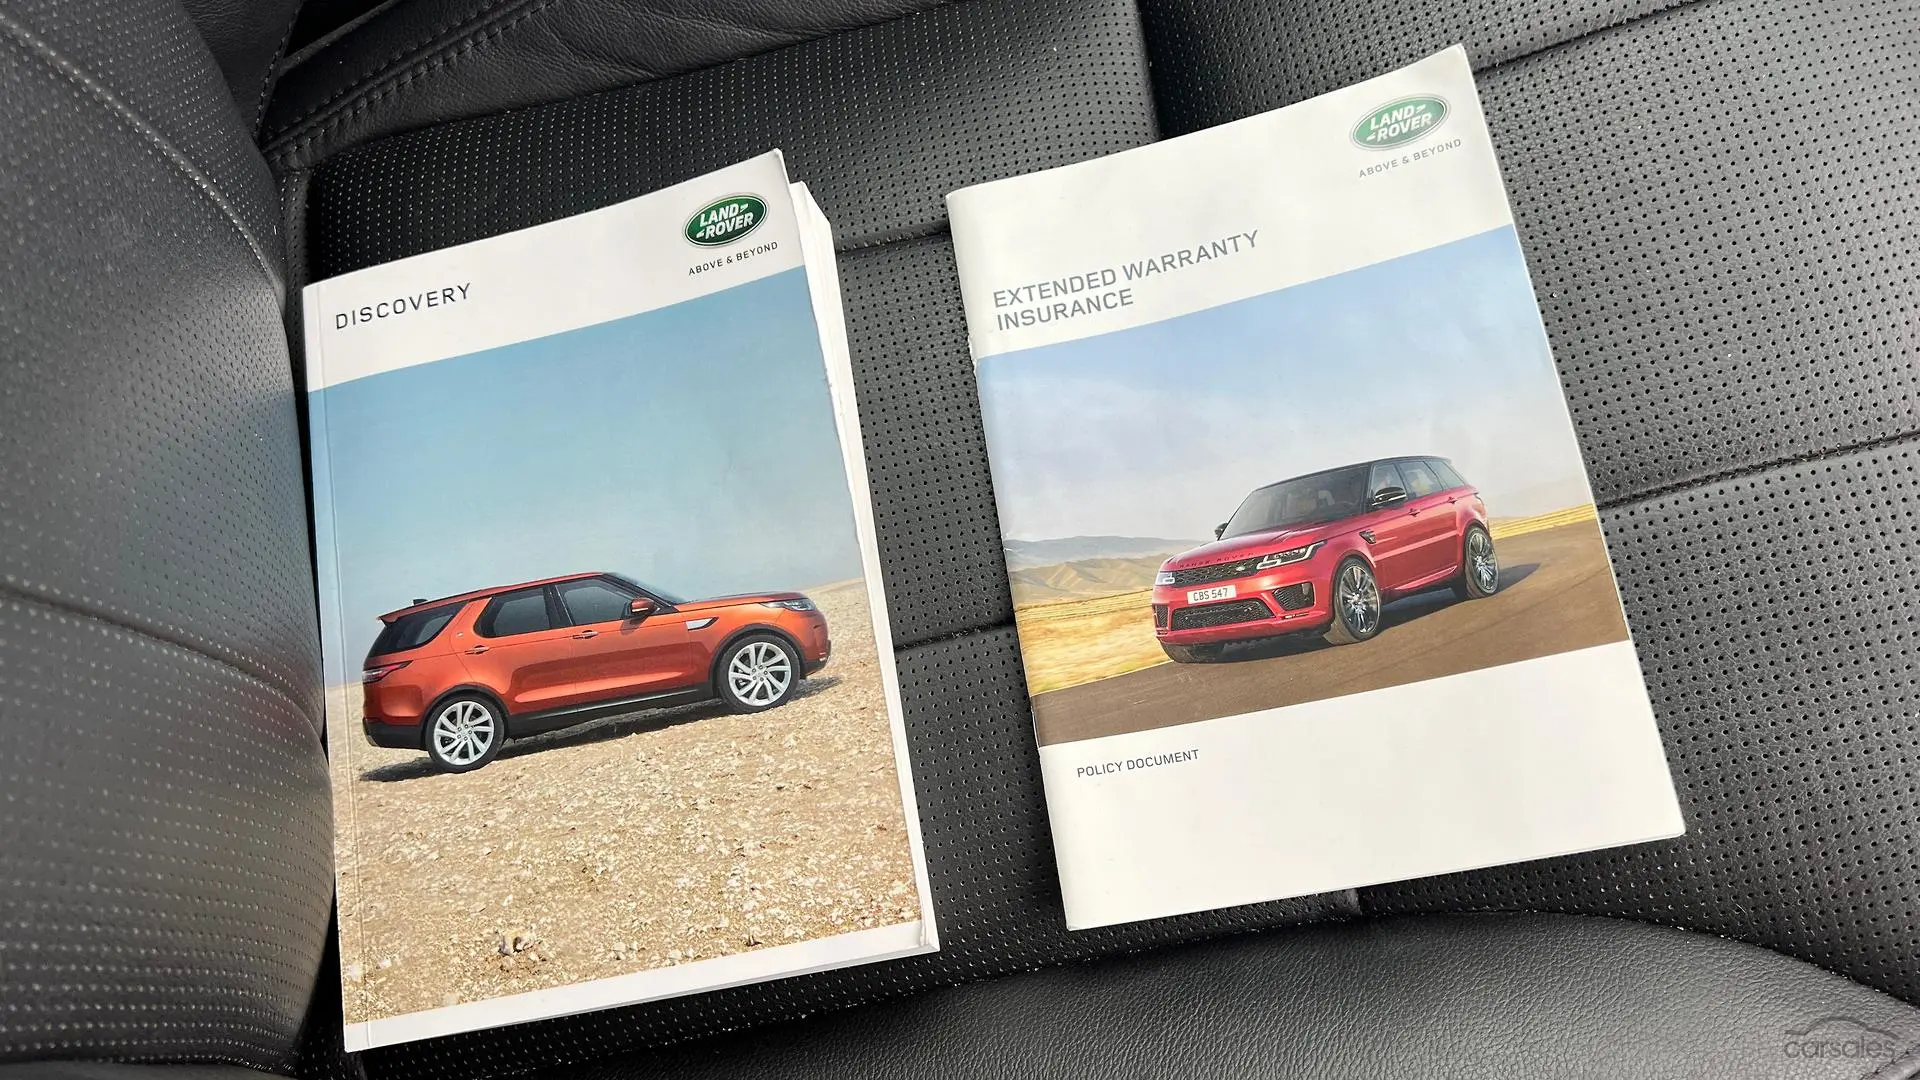 2018 Land Rover Discovery Image 25